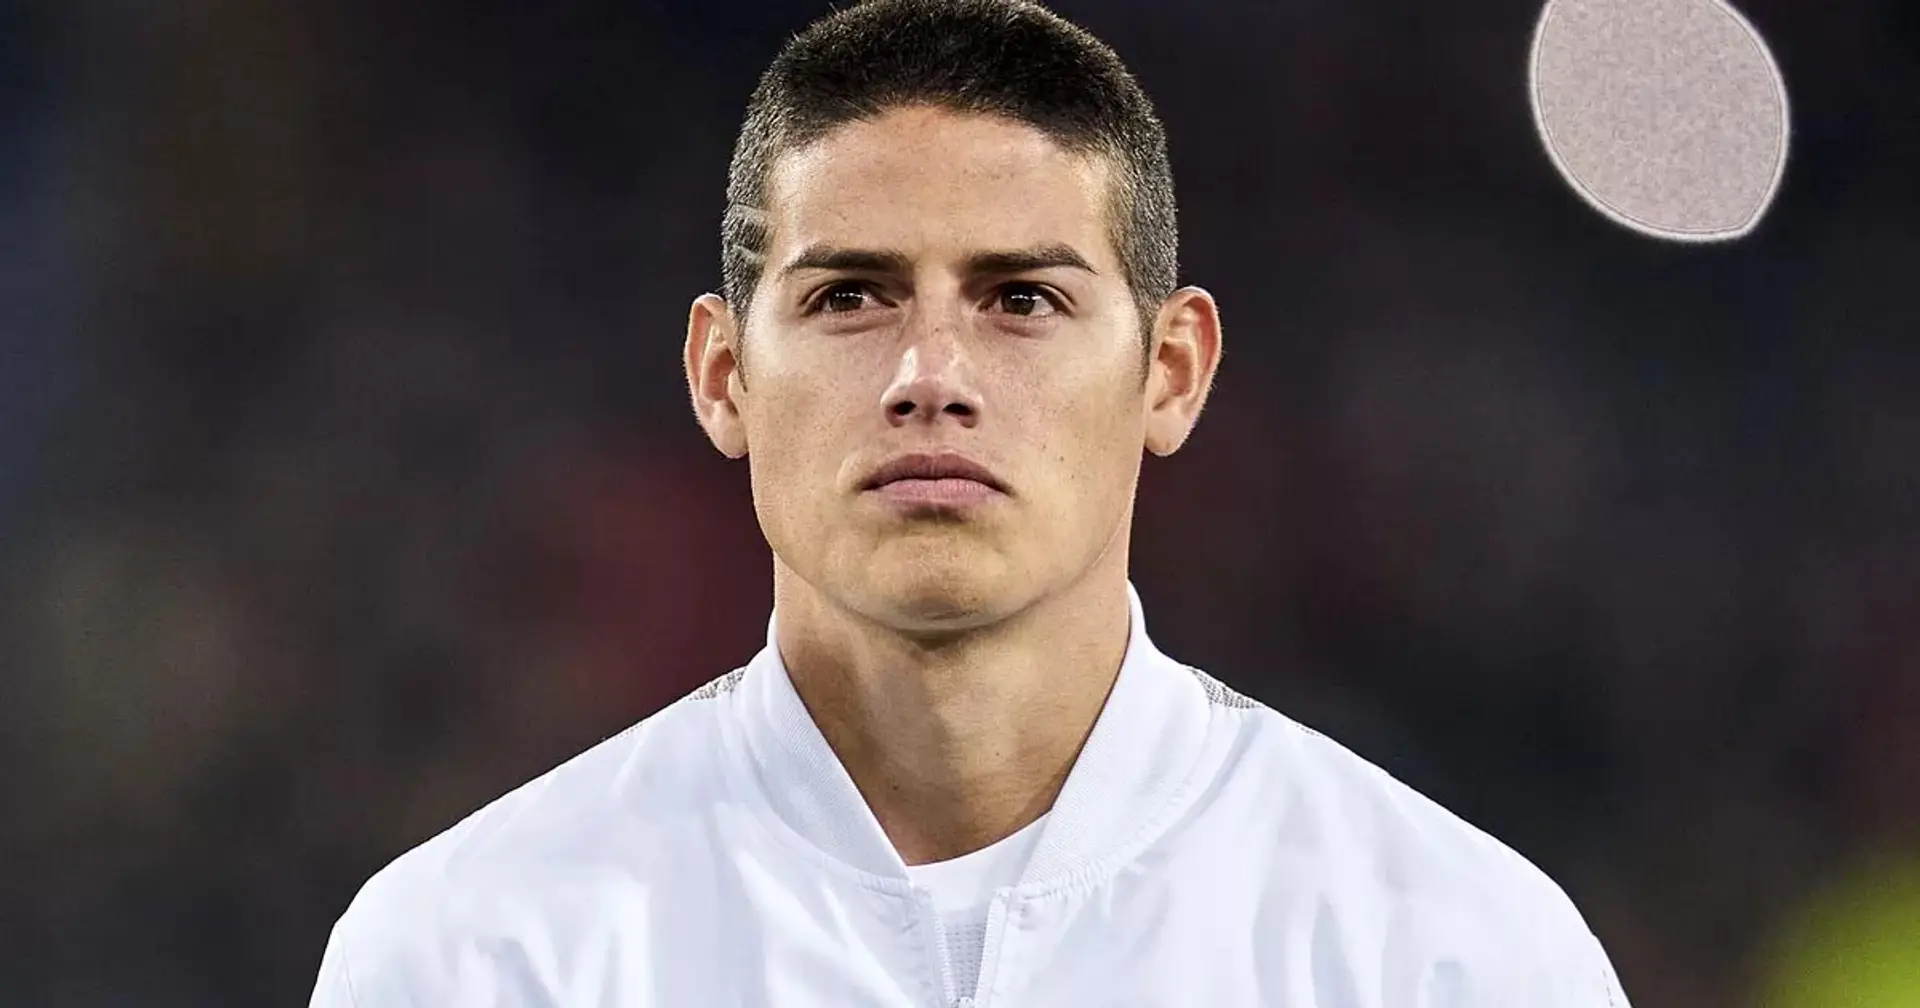 £28m for James Rodriguez? Newcastle rumoured to join race for Real Madrid man